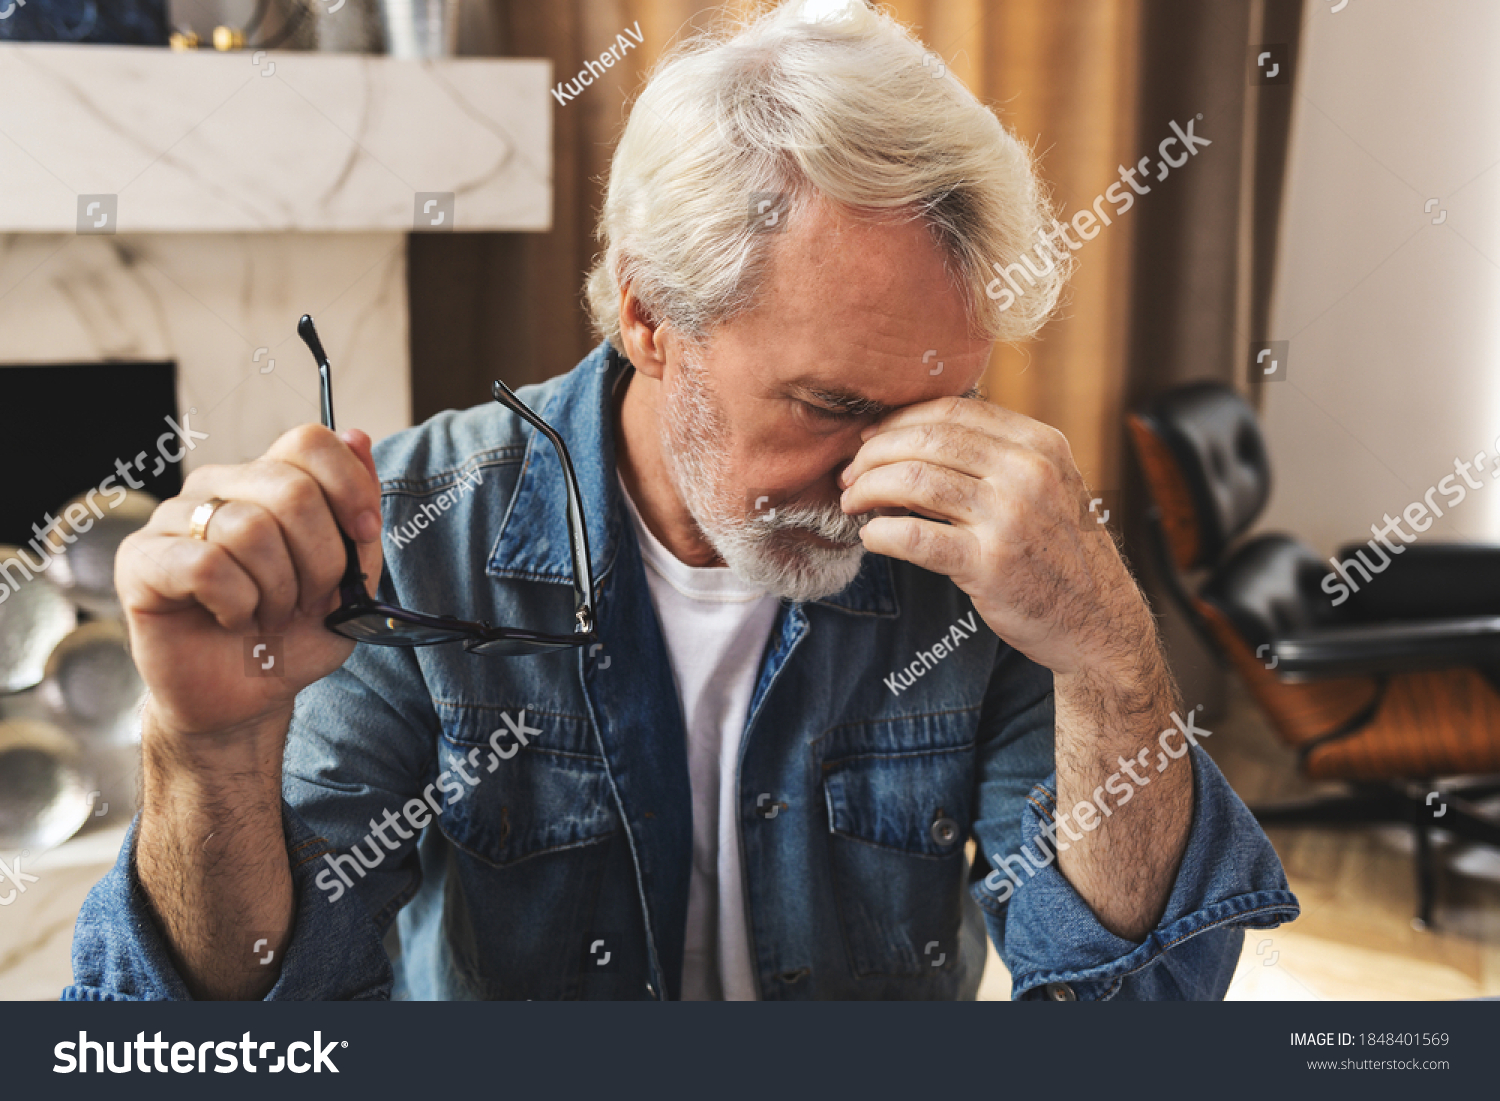 Tired men feel pain, eye strain holds glasses, rubbing dry irritated eyes, fatigue from working at a computer, stressed man suffers from headaches, poor eyesight, vision problems #1848401569